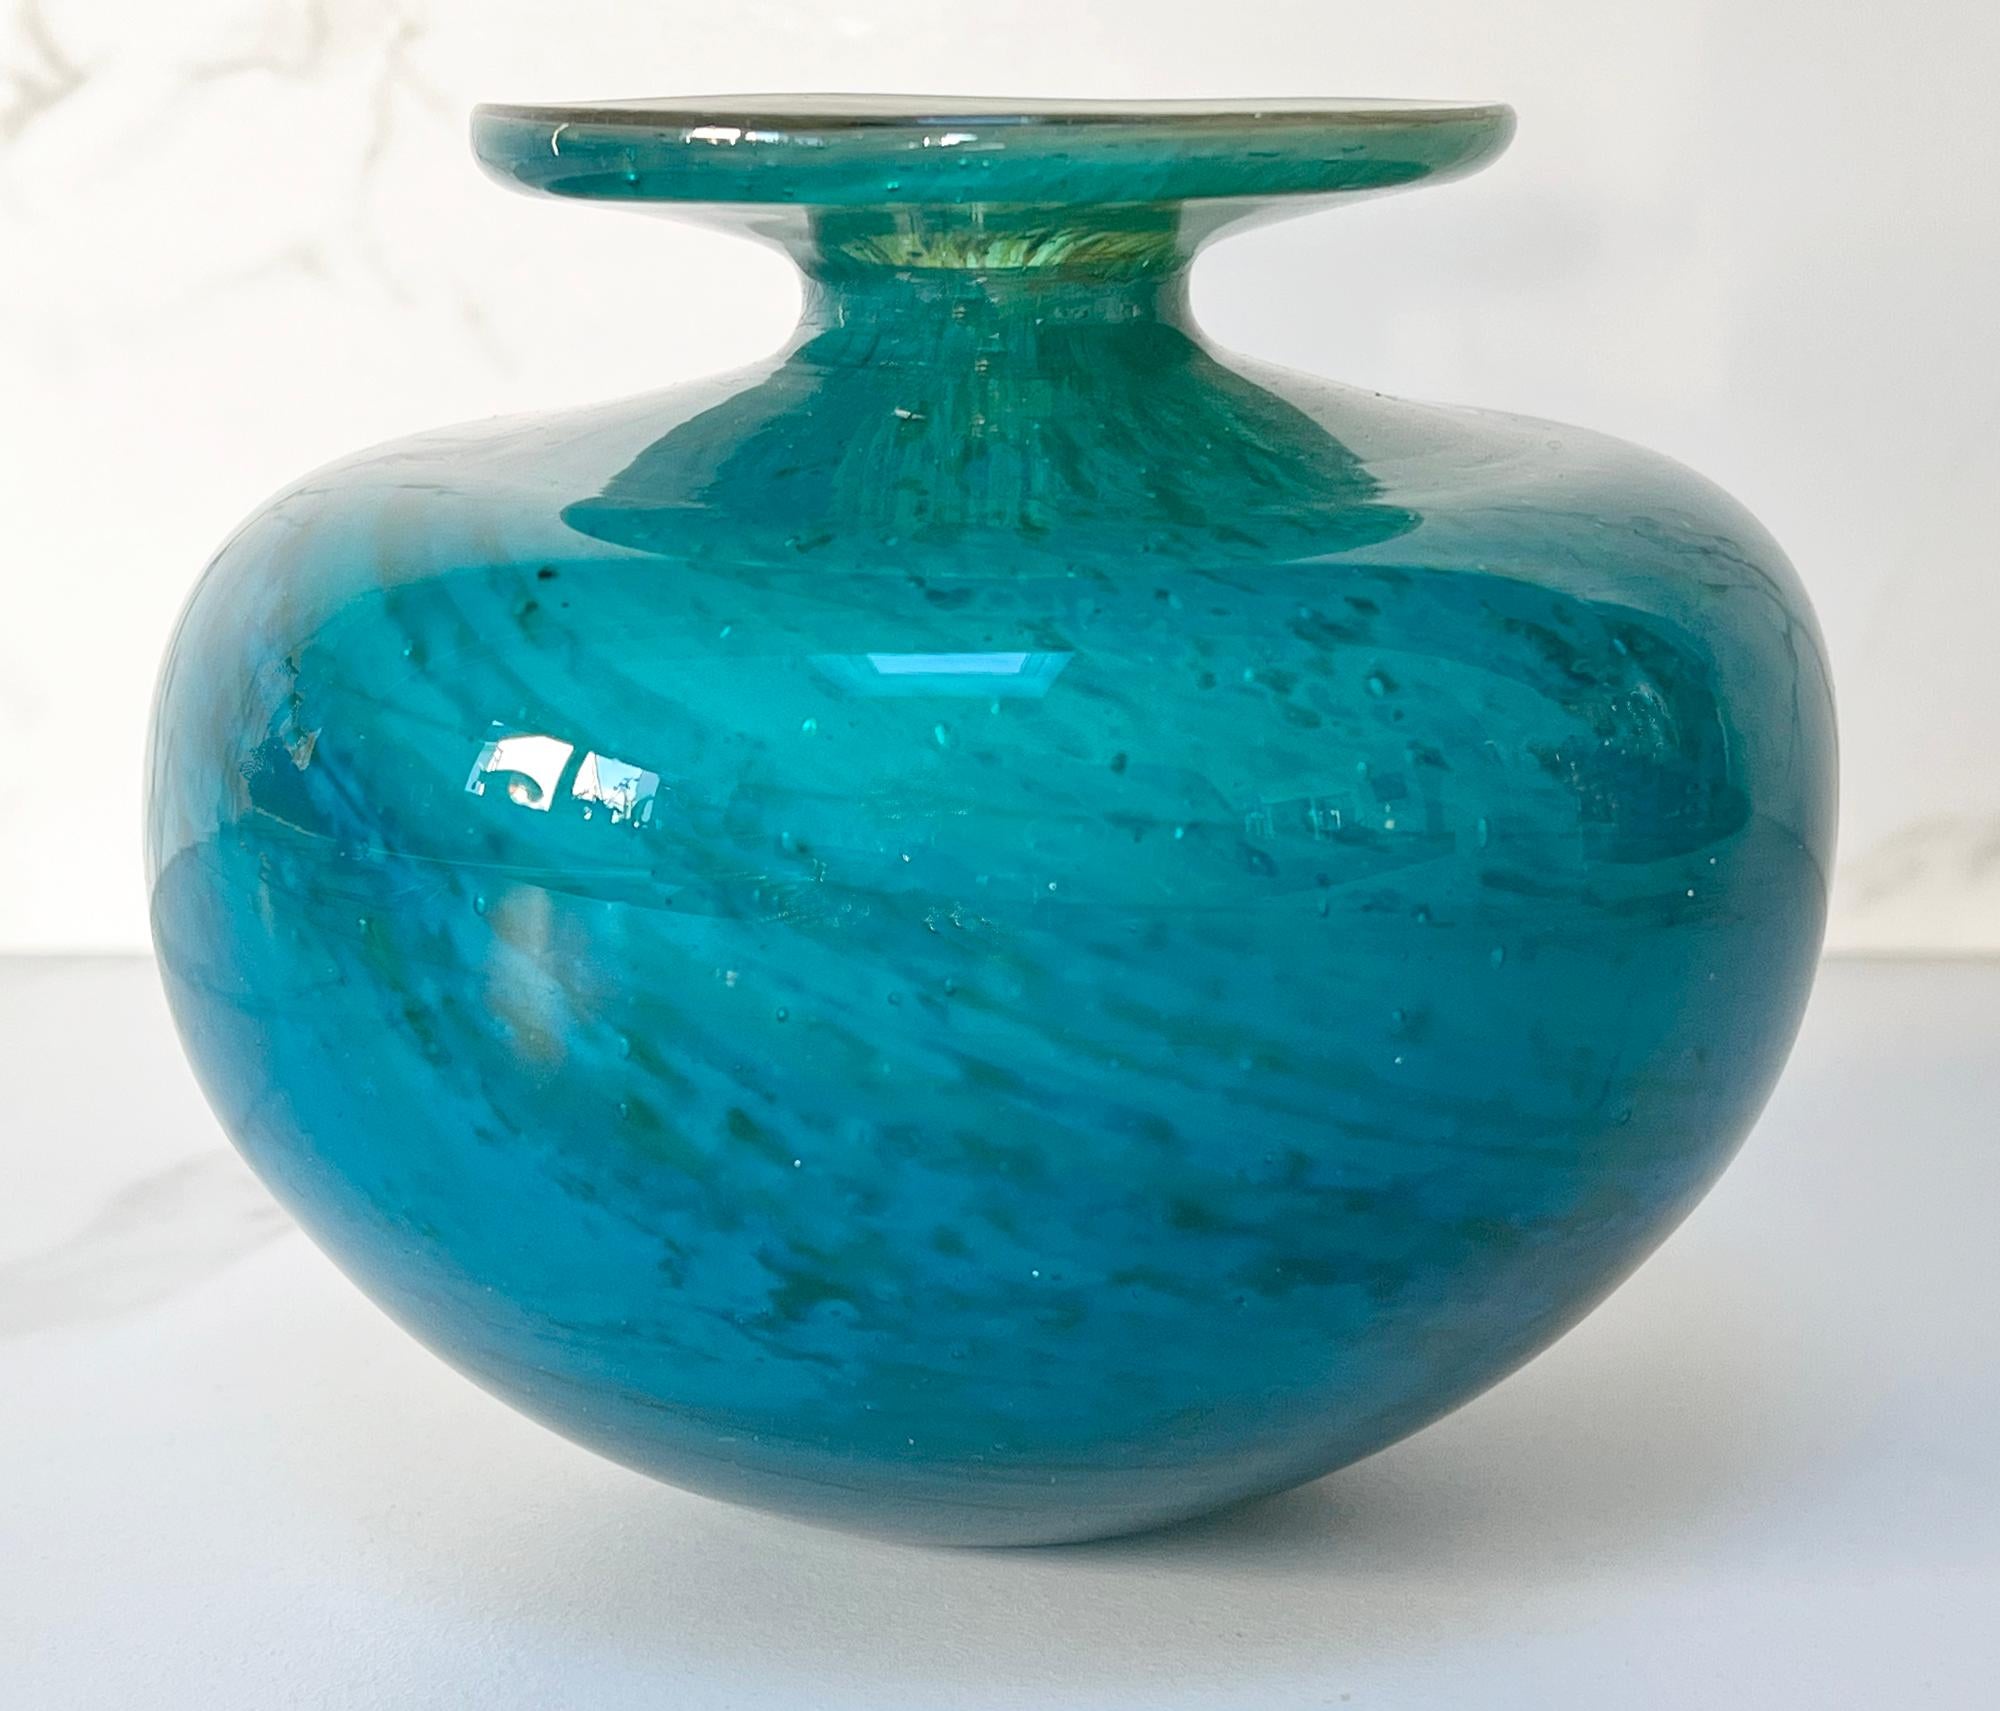 A stunning vintage Maltese Mdina art glass vase of squat rounded globular form with a narrow neck and wide rounded flattened top dating from the 1970's. The vase has rich blue turquoise with splashes of blue with sand colours to the top. The vase is